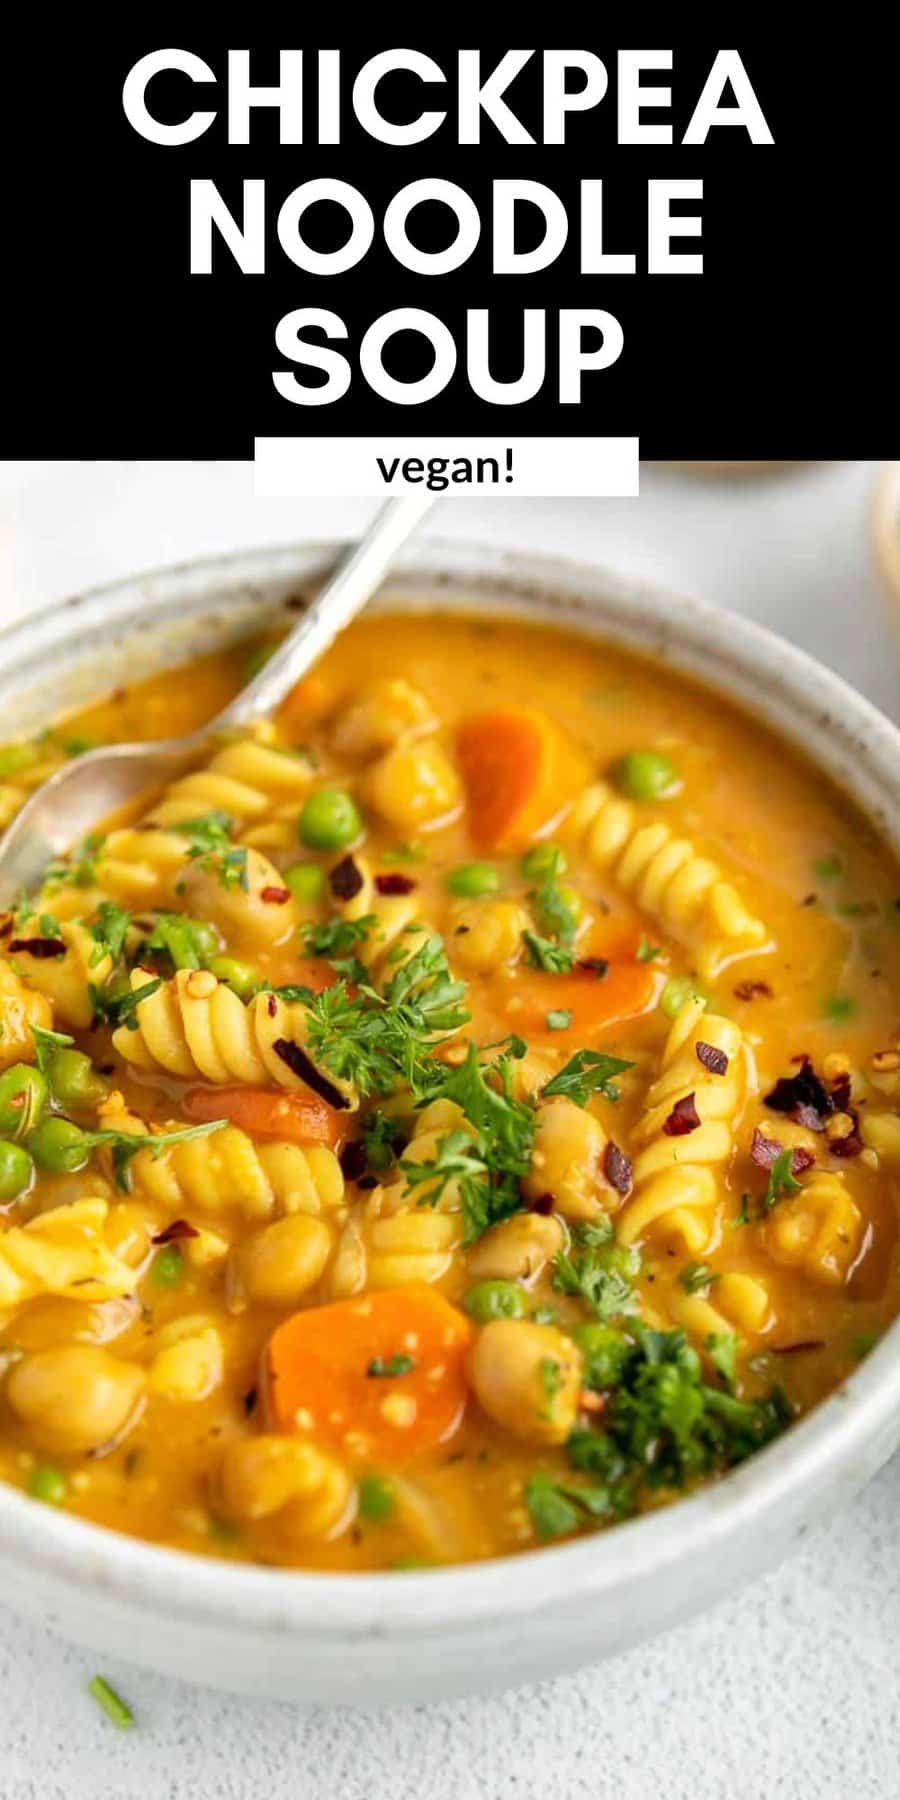 Vegan Chickpea Noodle Soup - Eat With Clarity